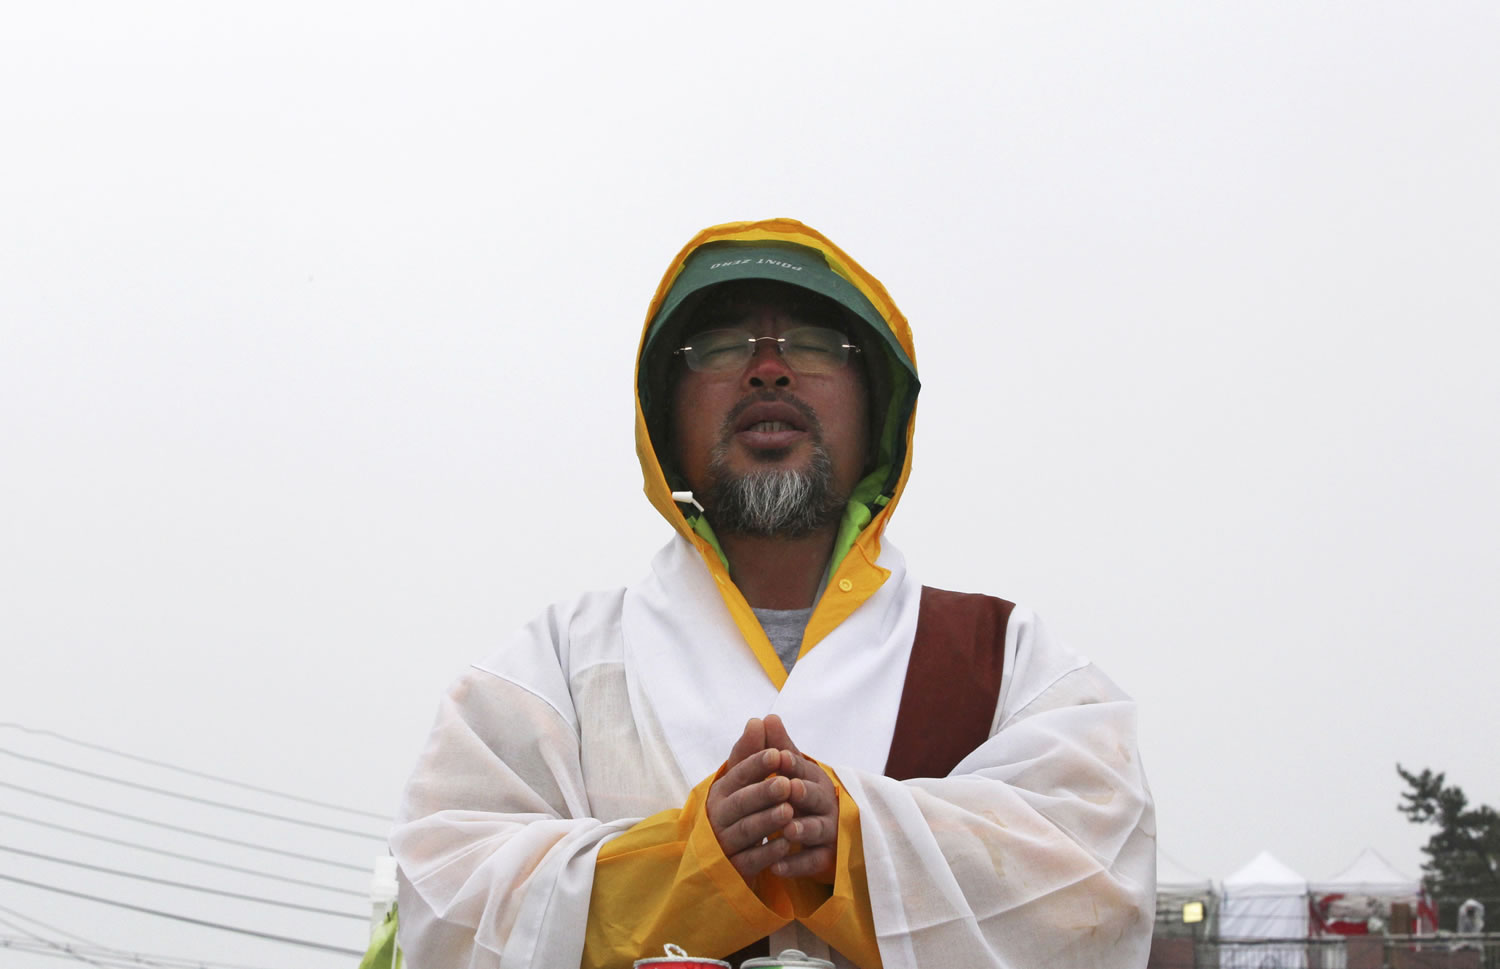 Buddhist monk, Bul Il offers prayers to wish for safe return of passengers of the sunken ferry Sewol in Jindo, South Korea.